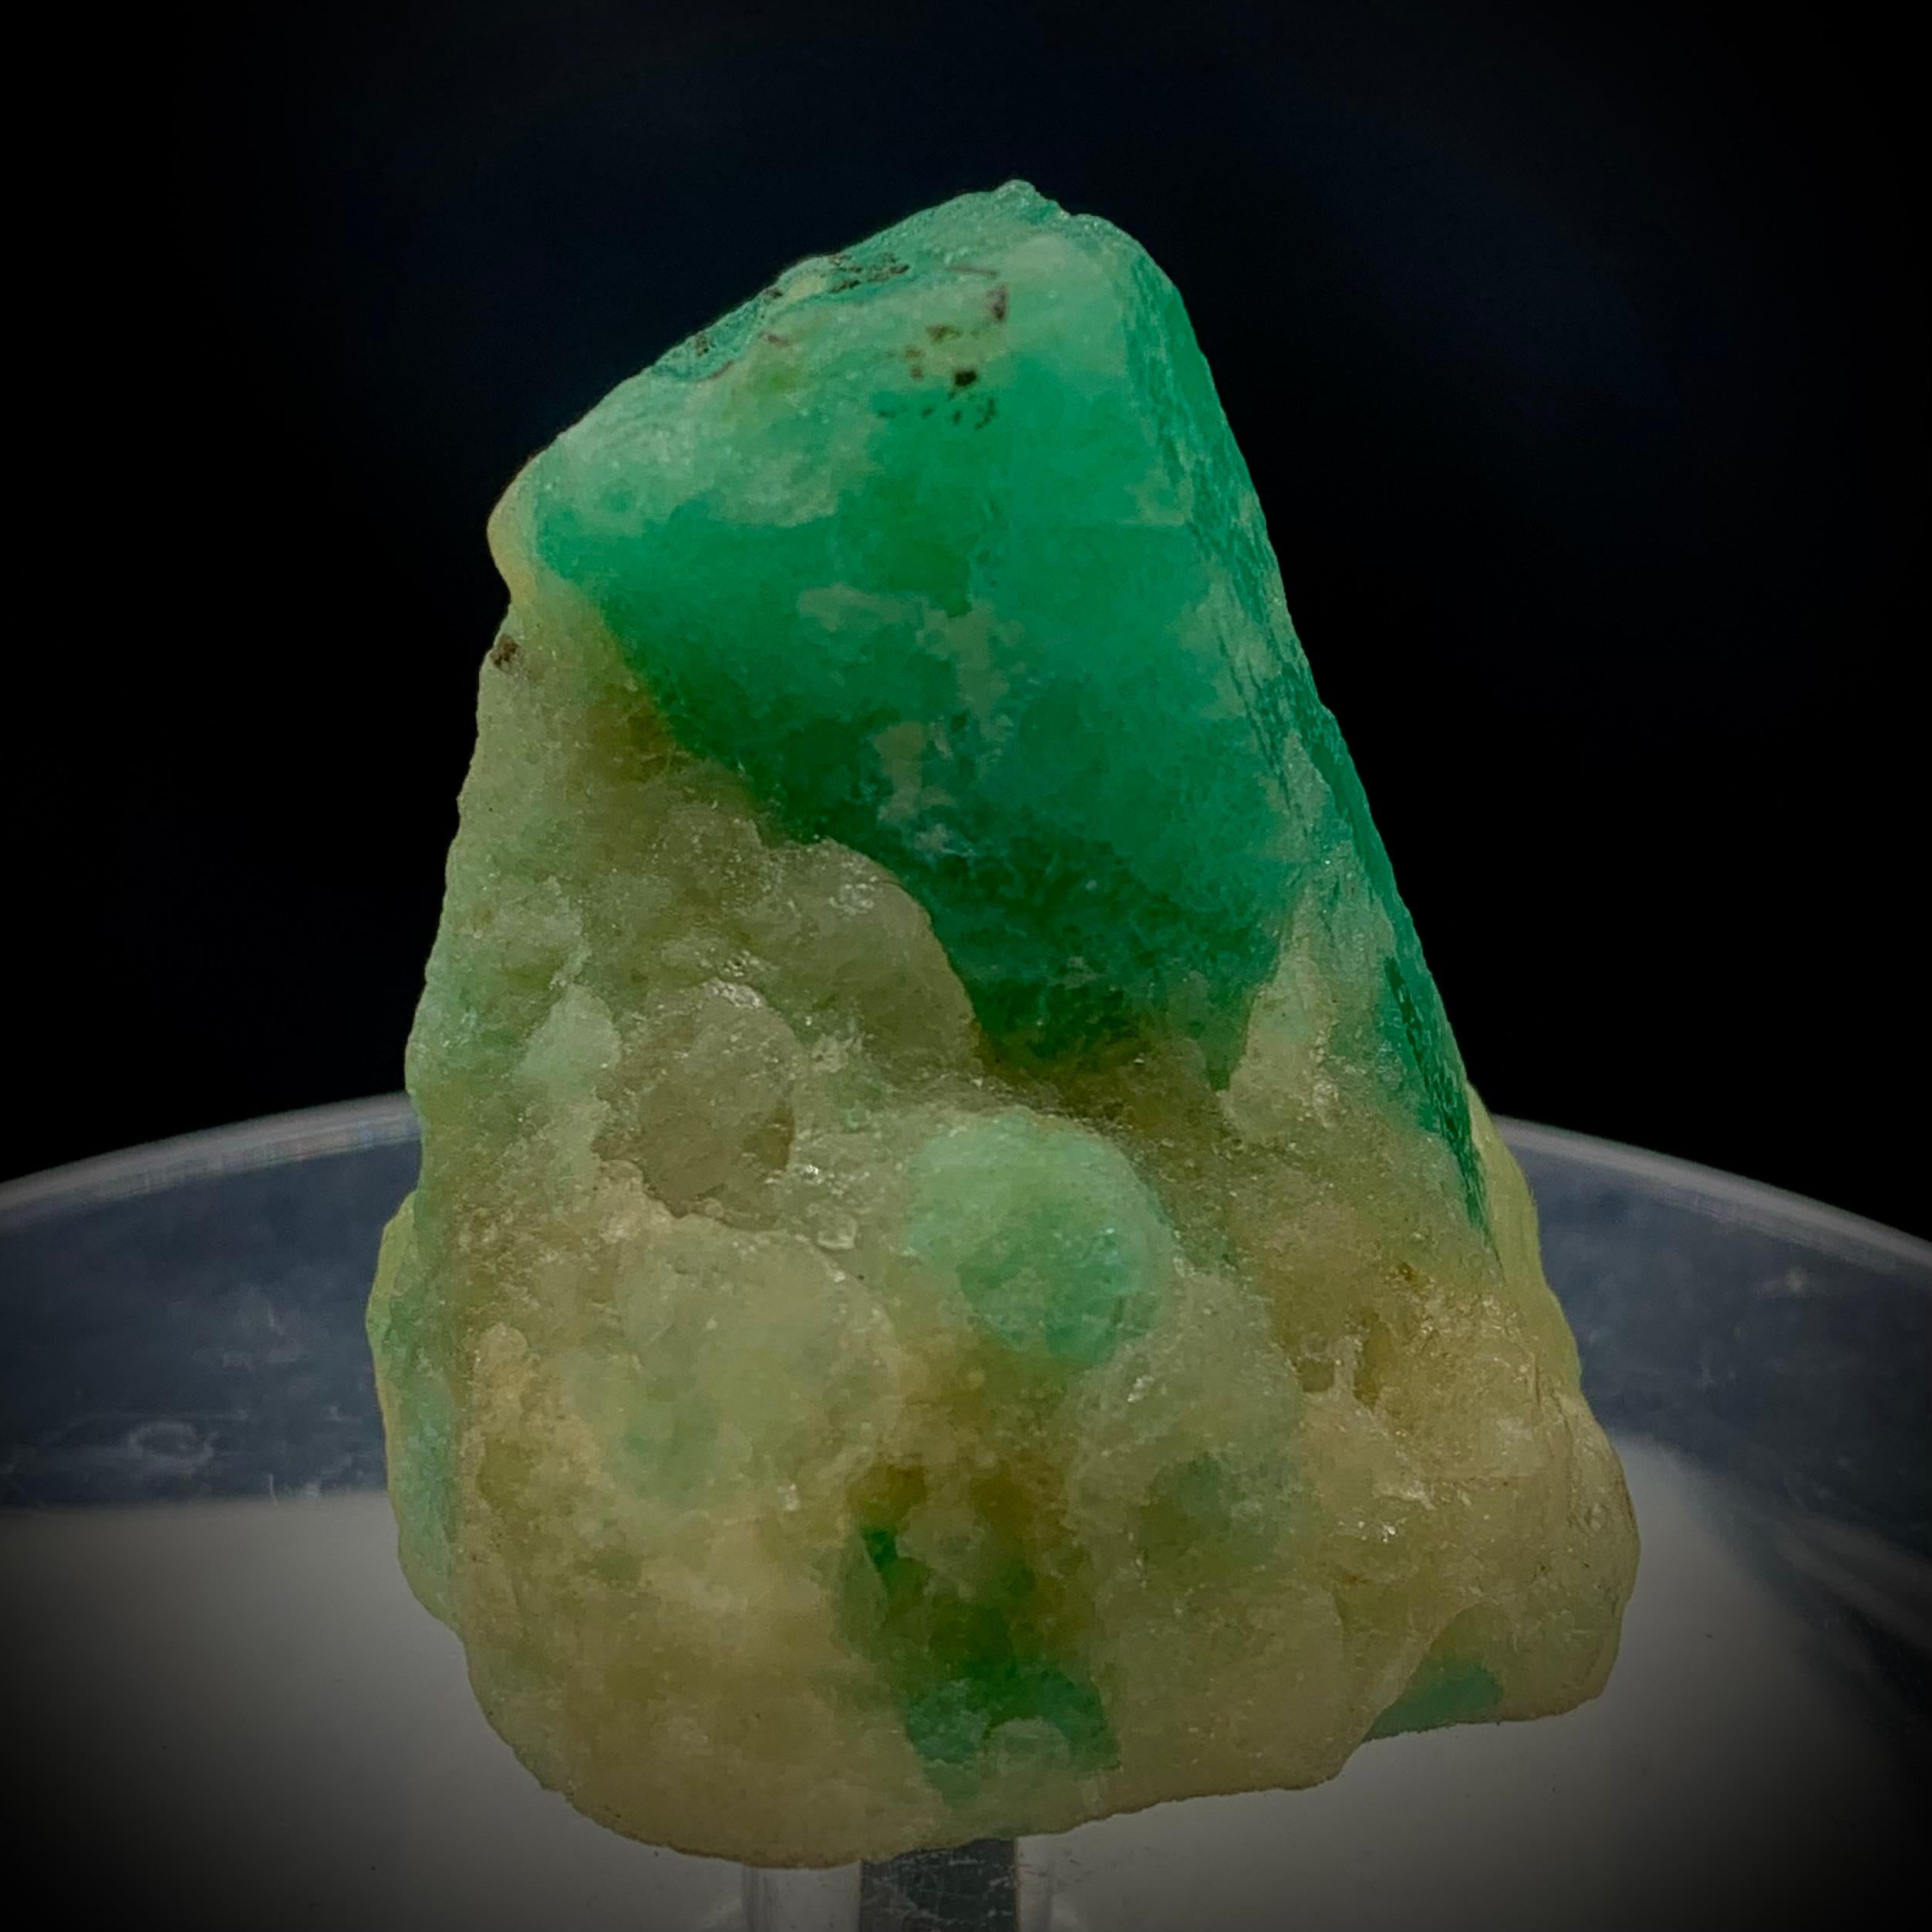 44 Grams of Green Emerald Crystal on Calcite Matrix which is available for sale at wholesale price from Swat Valley, KPK Province, Pakistan.
Green Emerald Crystal on Calcite Matrix Swat Valley, KPK Province, Pakistan. resenting this miniature size